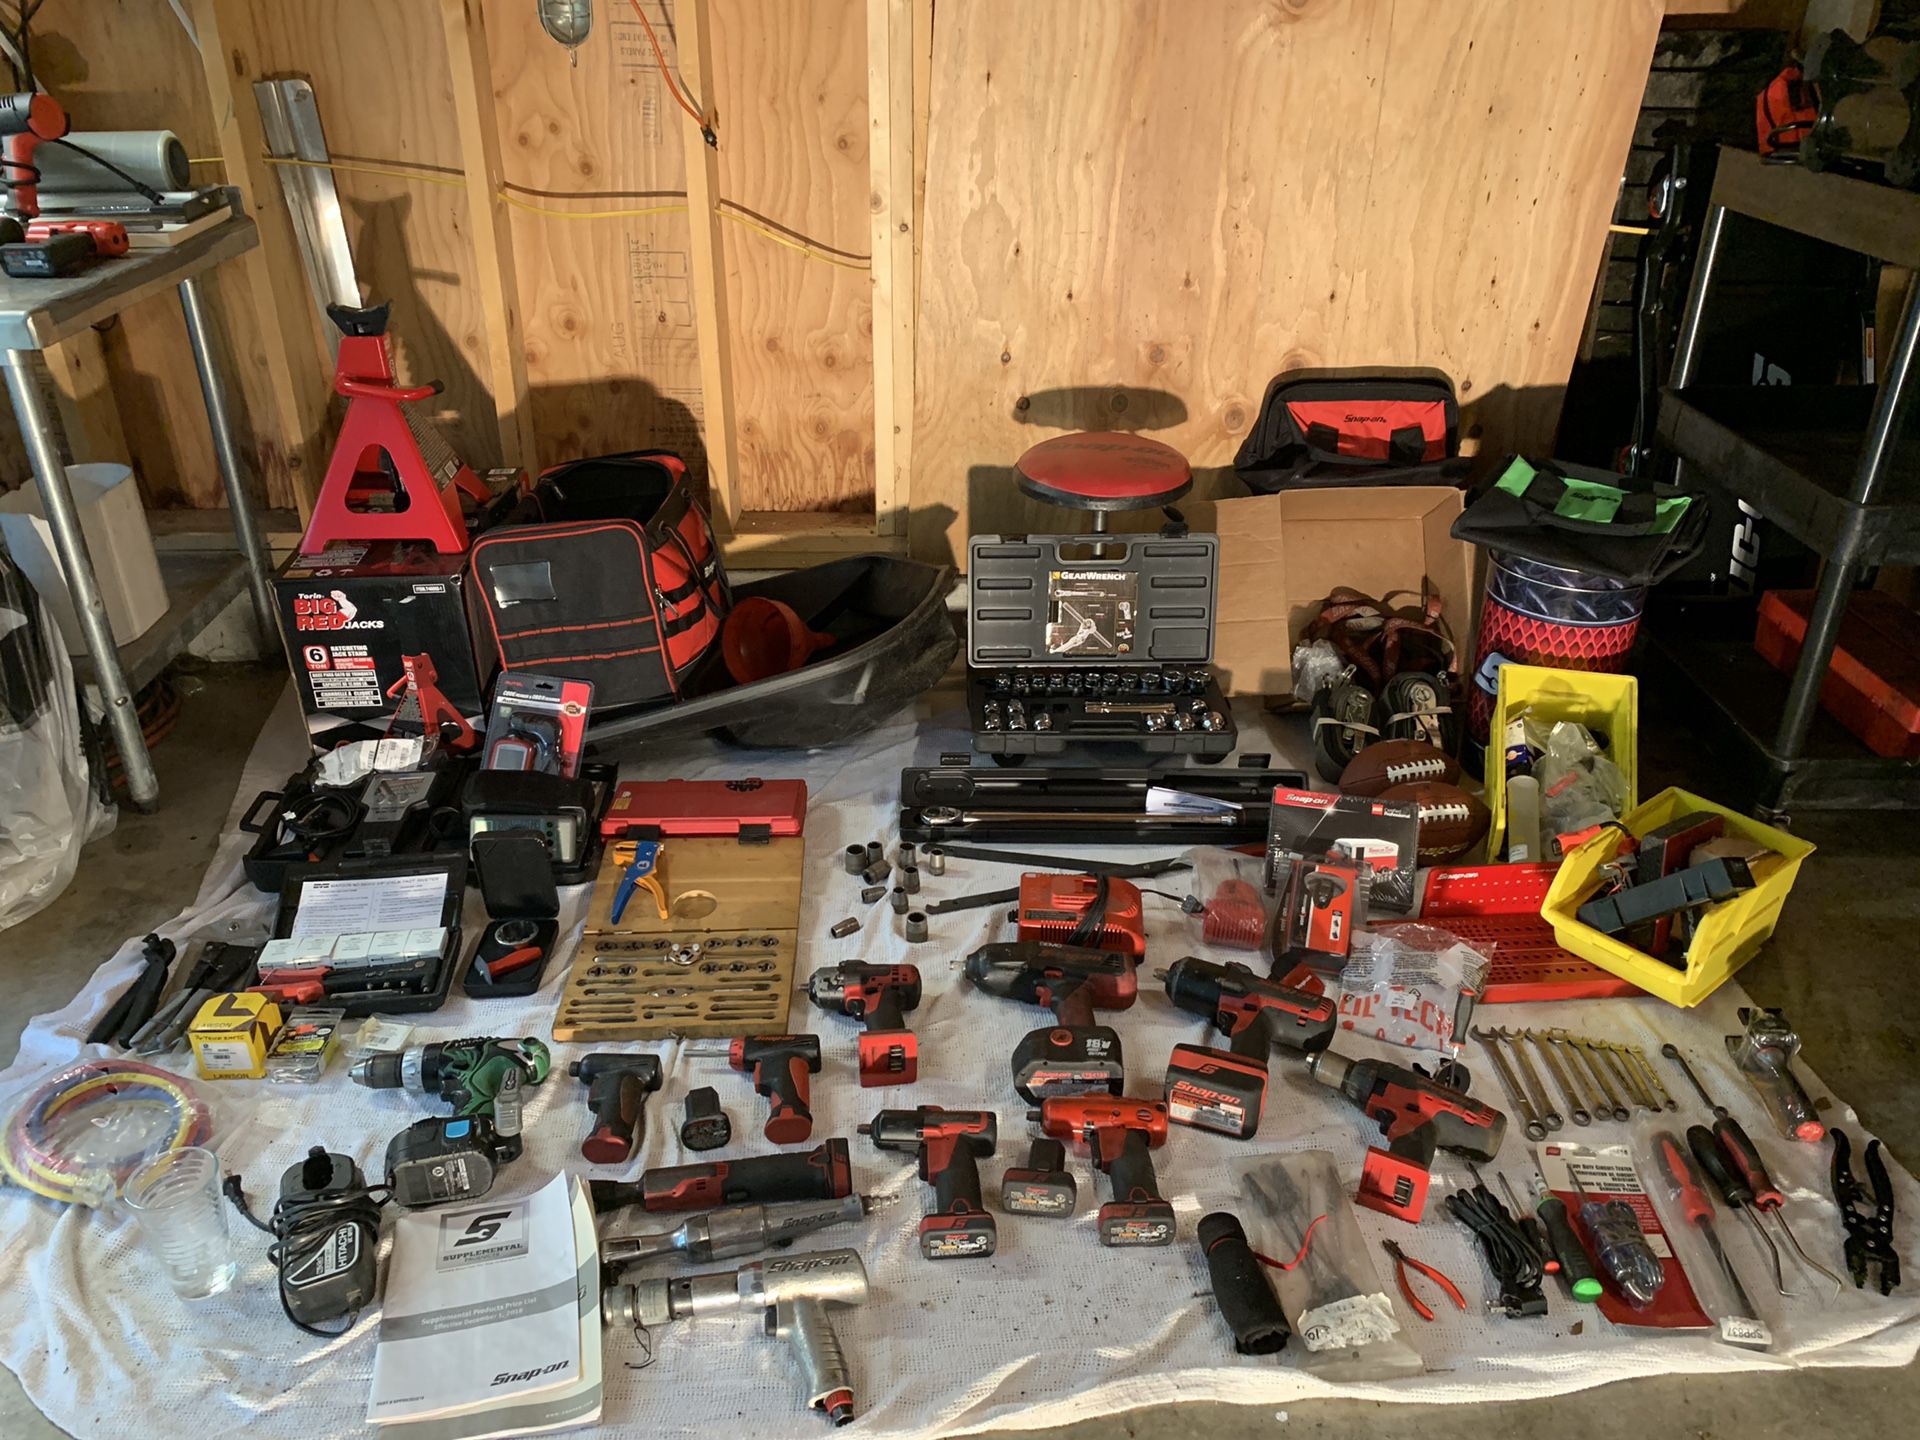 Snap on tools ++ REDUCED!